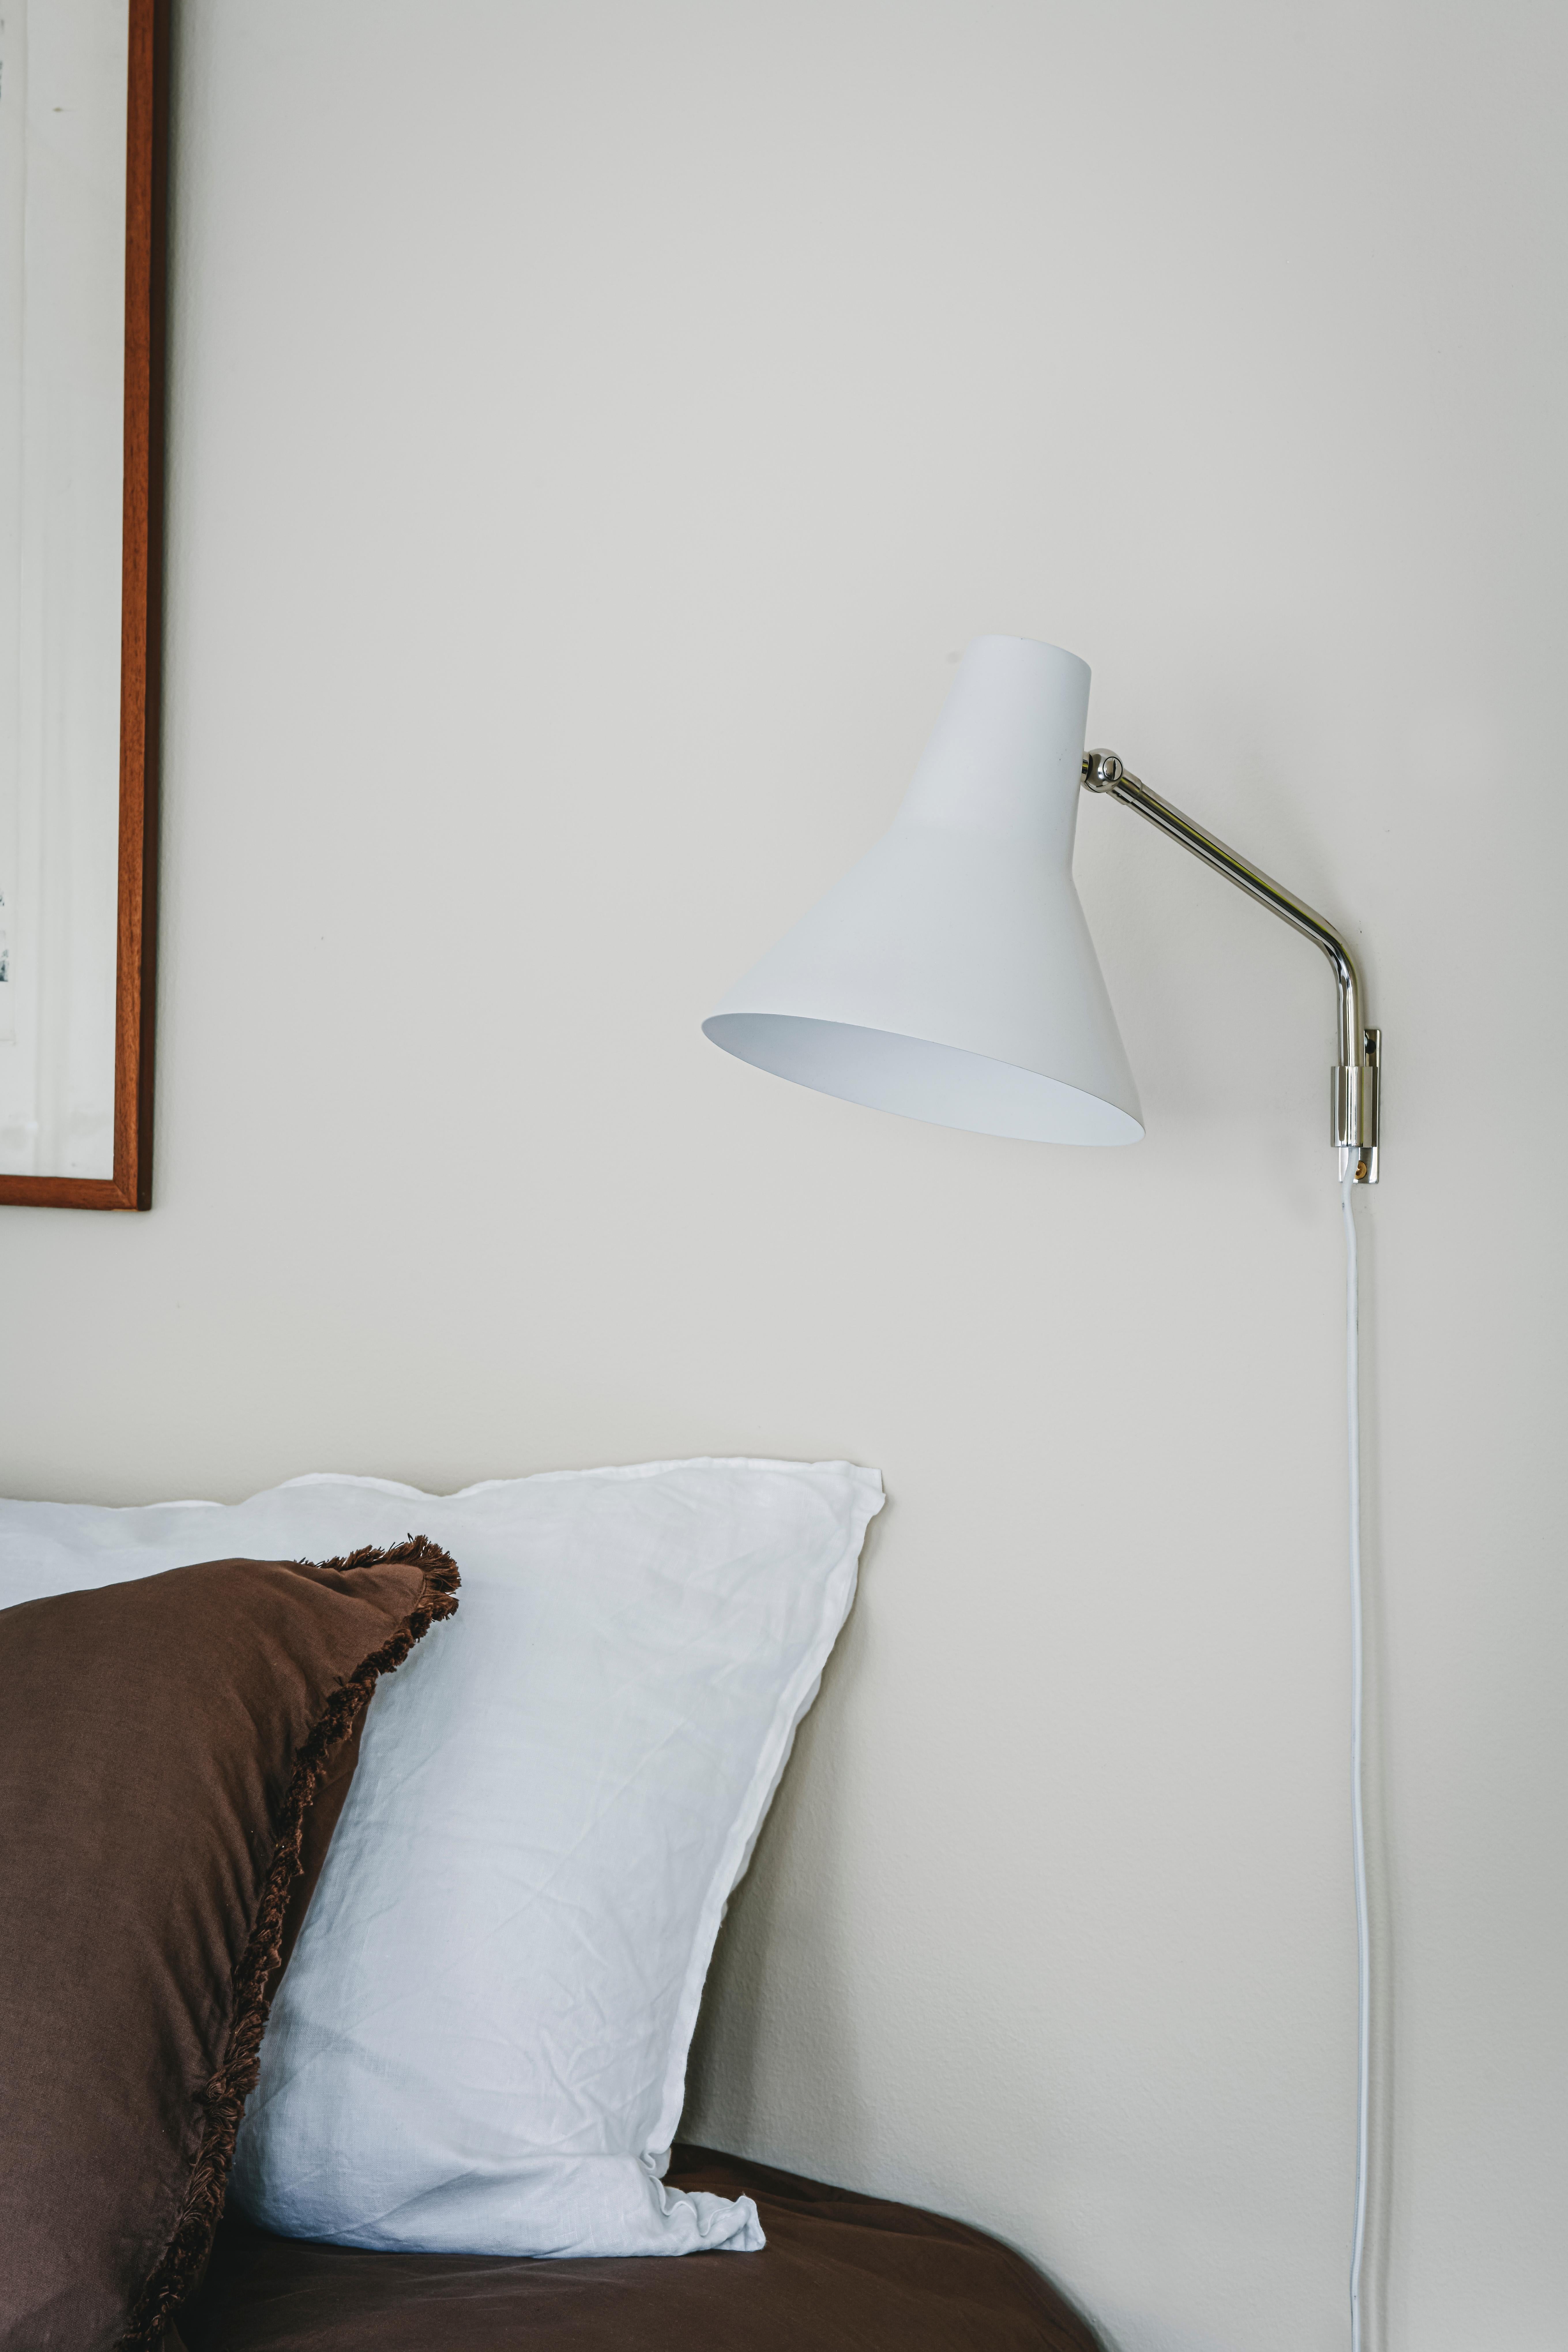 Pair of Lisa Johansson-Pape 'Carin' Wall Lamps in Polished Chrome for Innolux

Carin is a new family of luminaires with a sophisticated look sealed by a brass or chrome arm. The beautiful metal dome is easy to direct and the practical touch switch